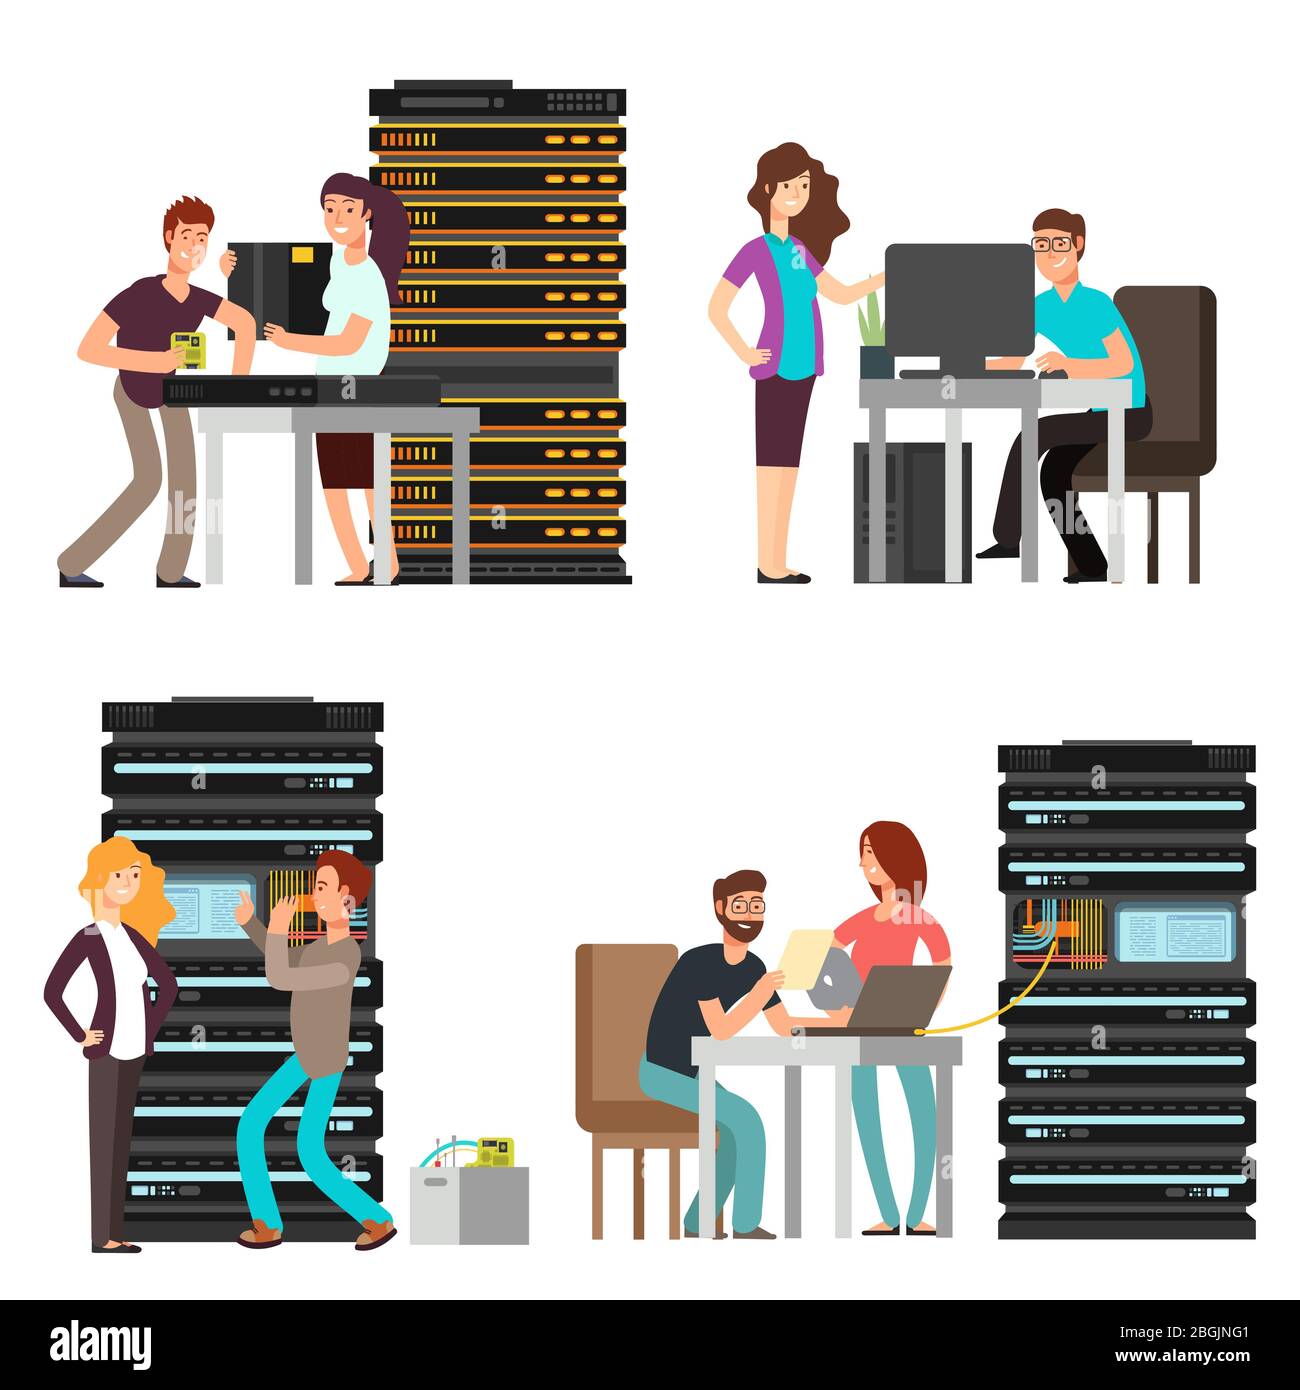 Man and woman engineers, technician working in server room. Digital computer center support. Vector illustration Stock Vector